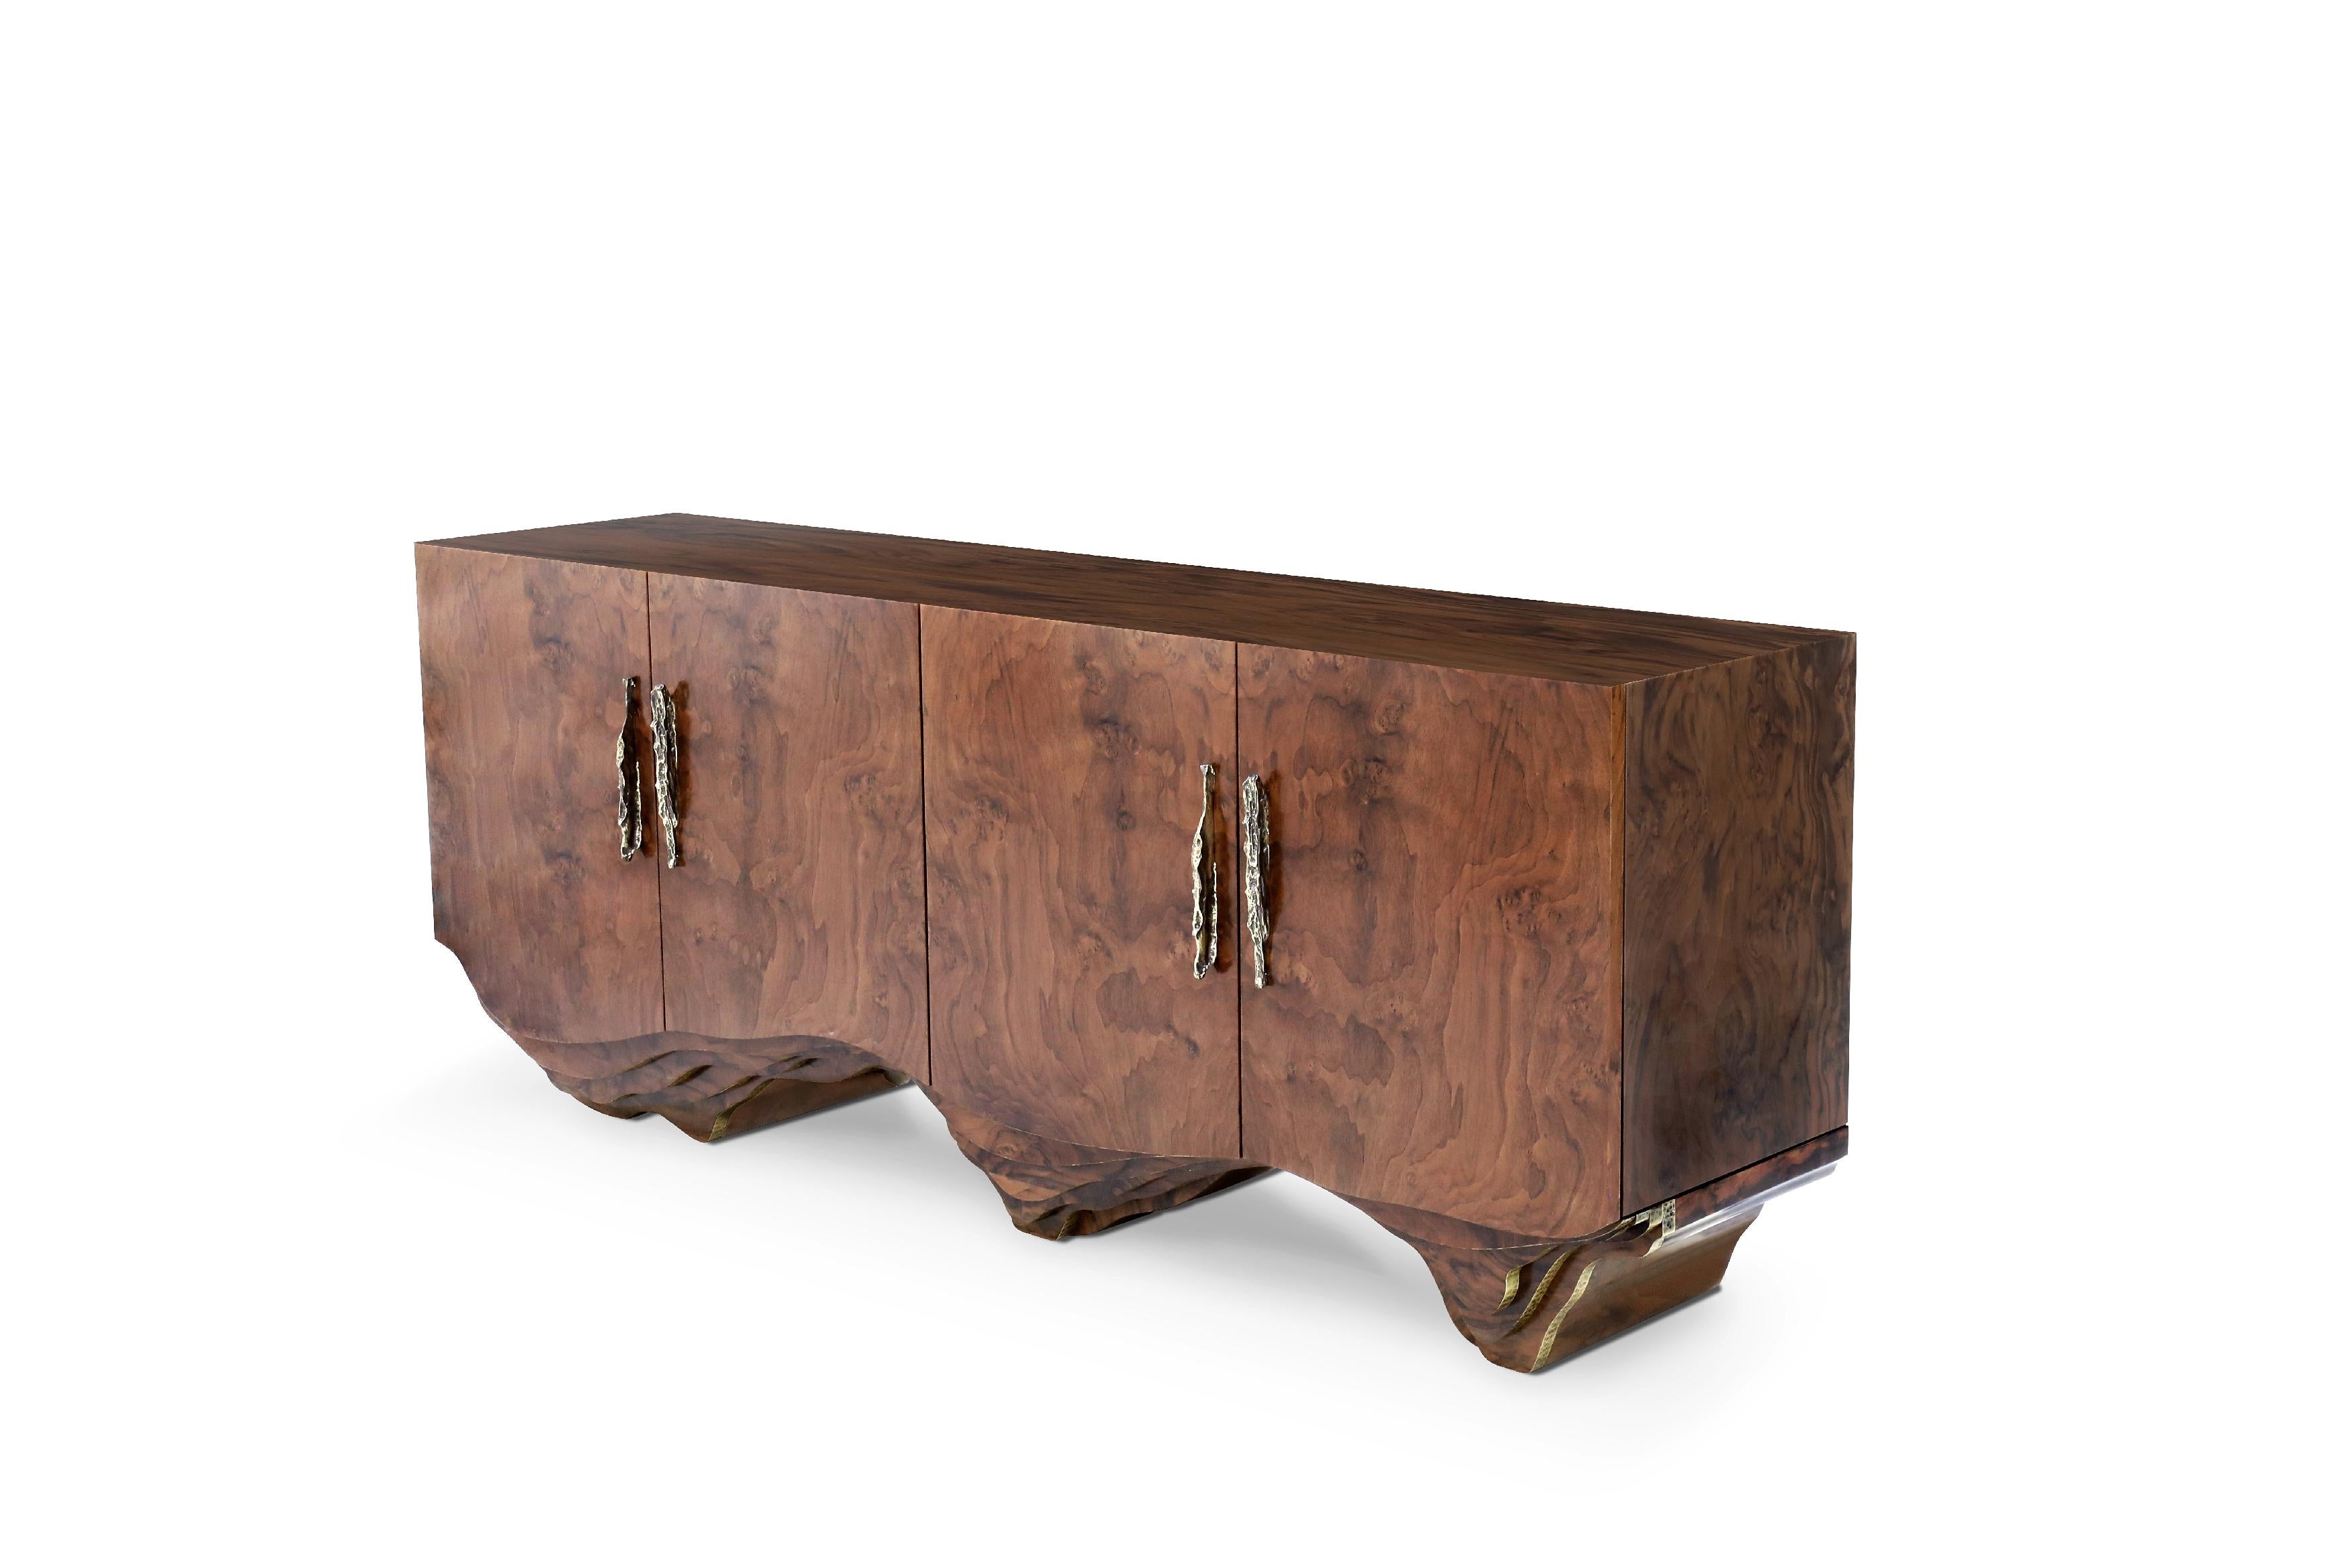 Huang is a mountain range in eastern China known for its spectacular scenery. Inspired by this magnificence, Brabbu’s designers created Huang sideboard. It features an outside in walnut root veneer, an inside in rosewood veneer and details in matte